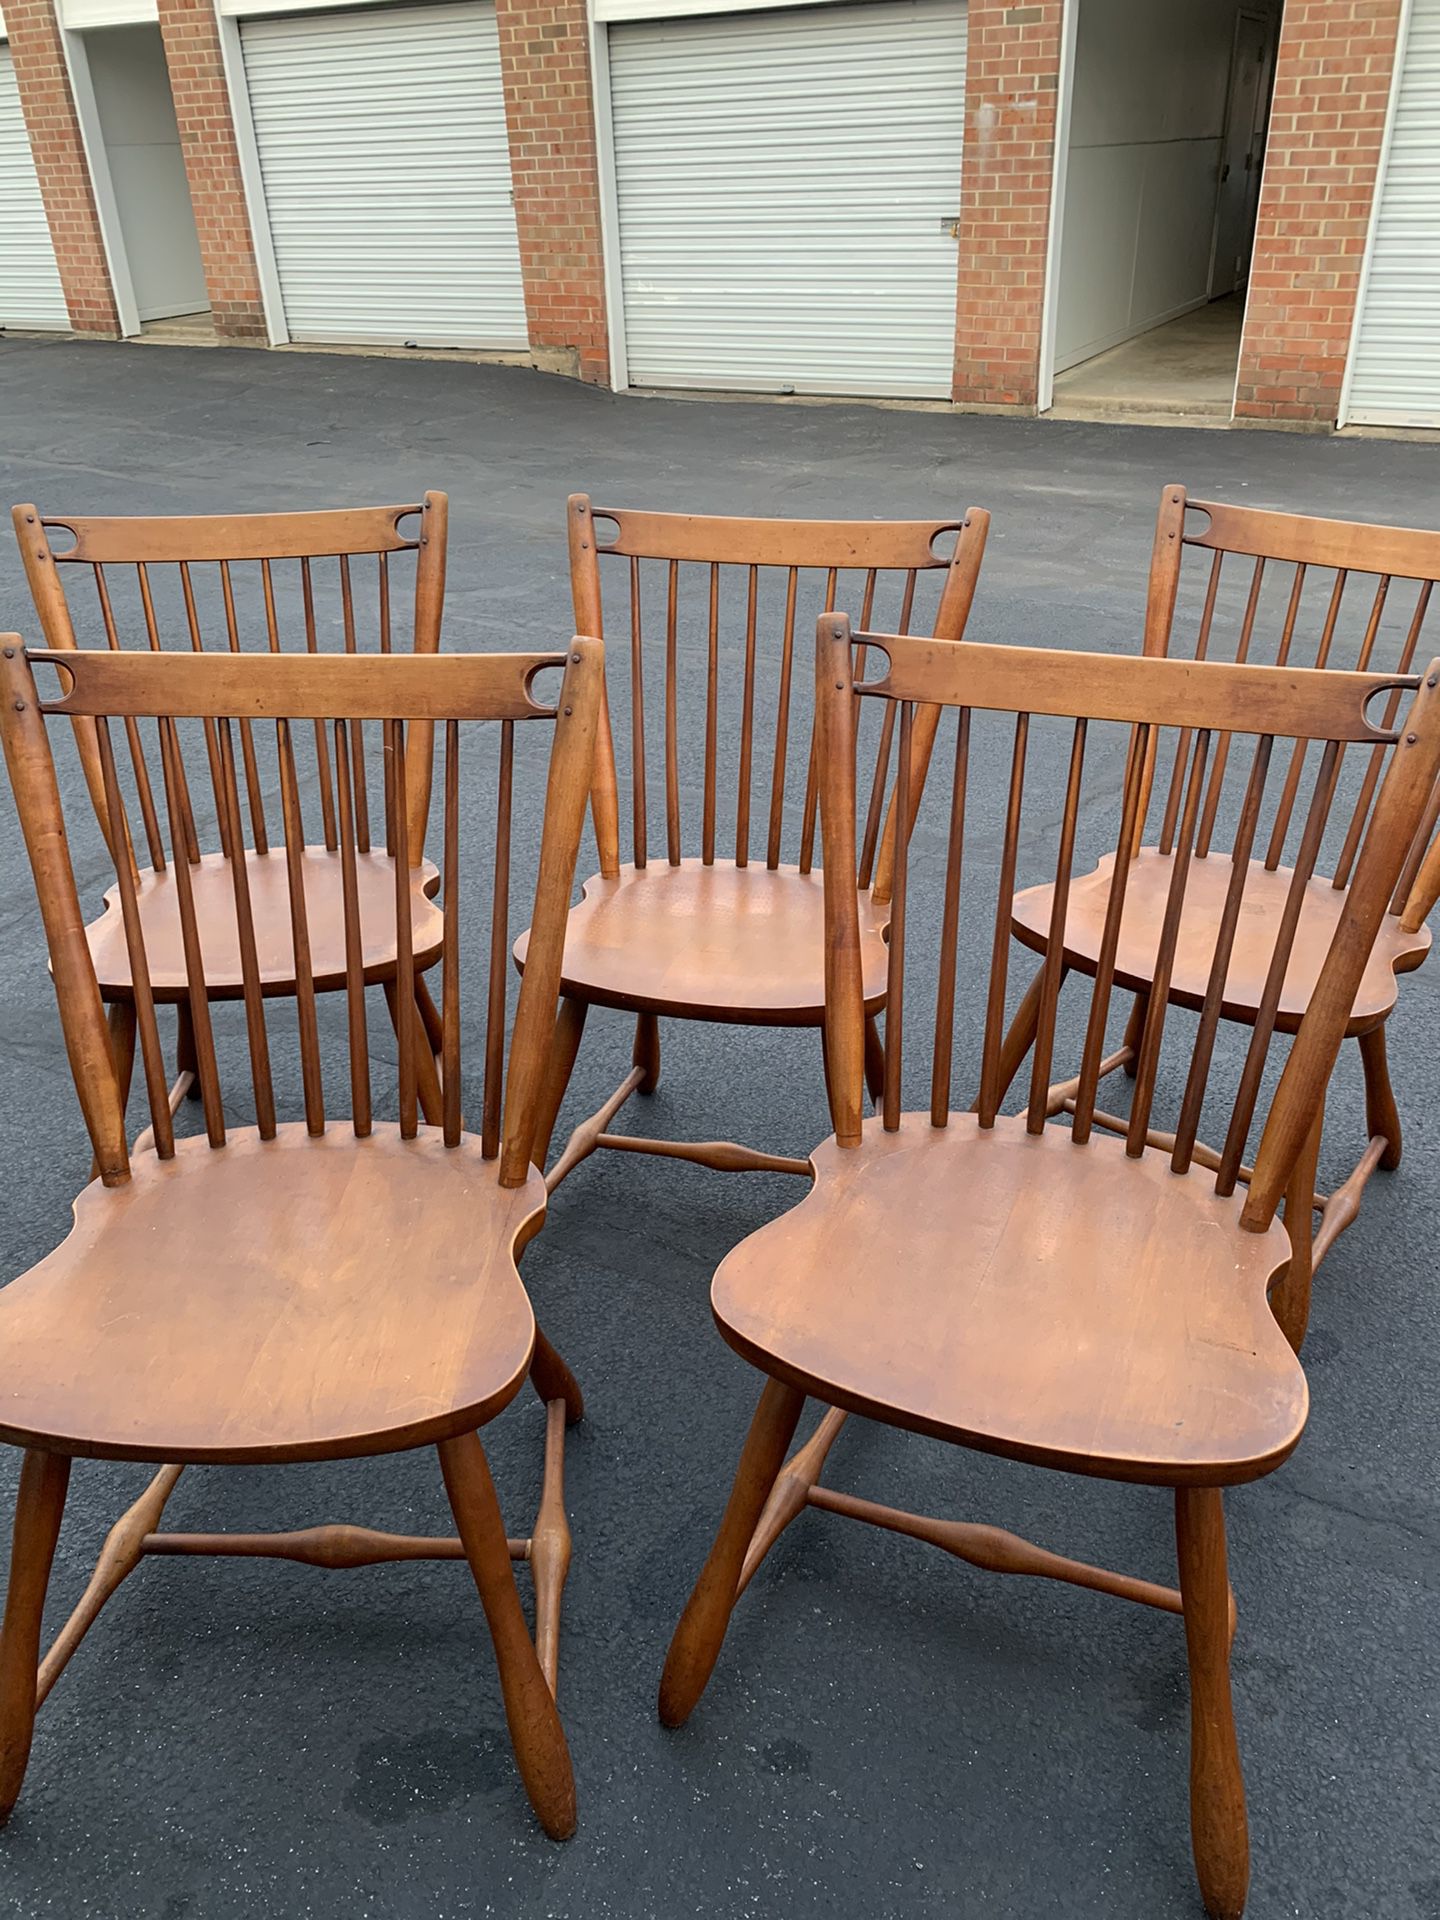 5 solid wood chairs